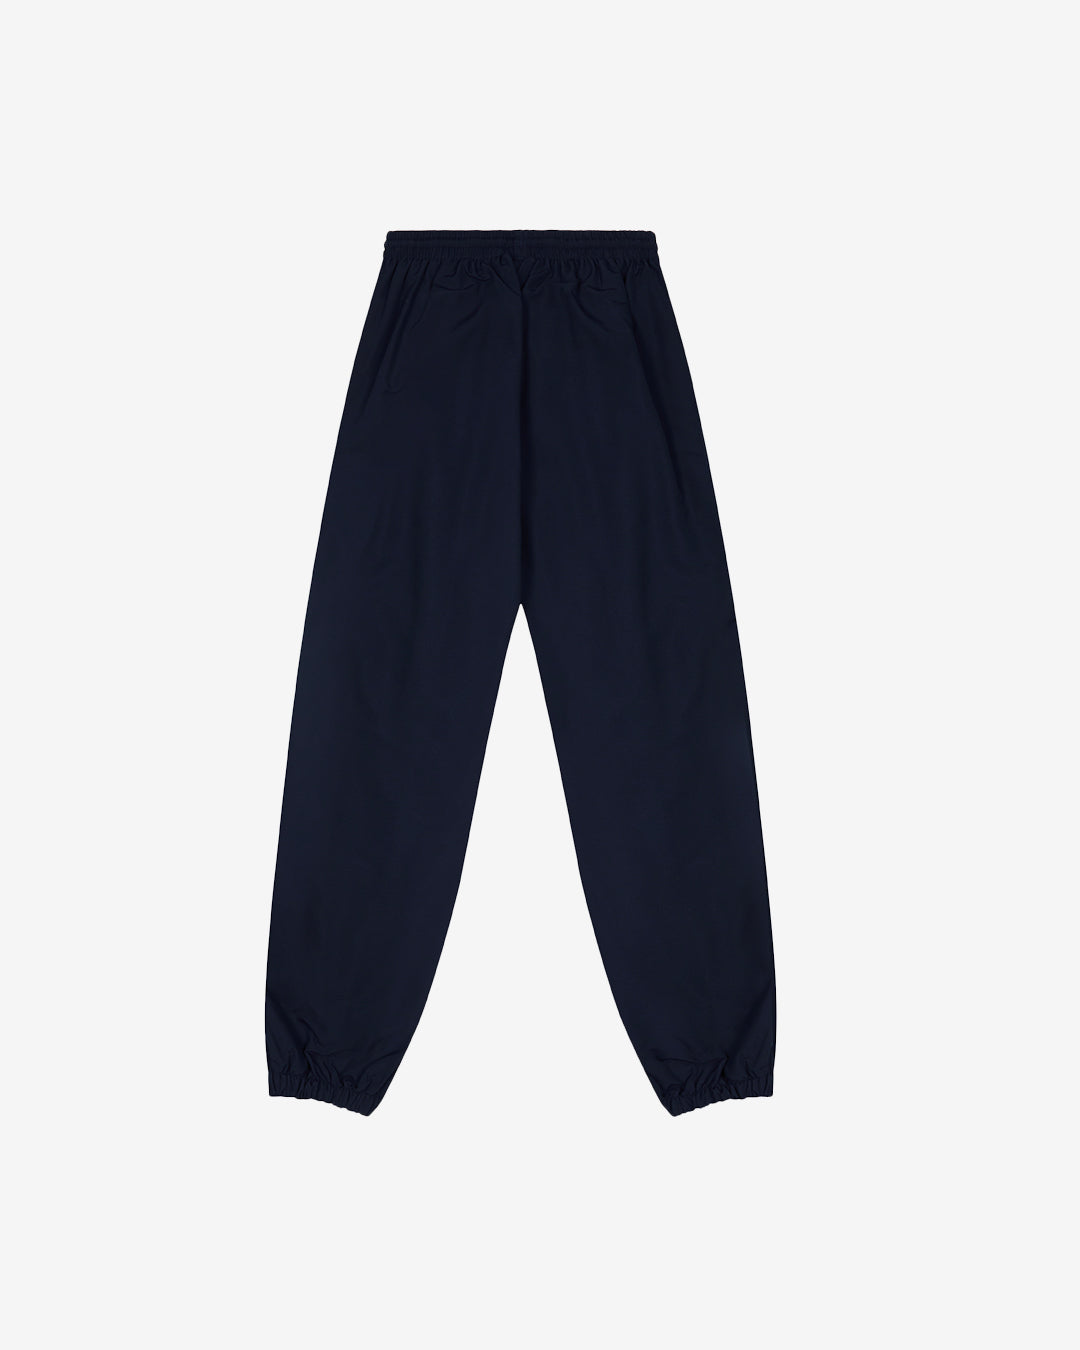 EP:0104 - Southland Track Pant 2.0 - Navy